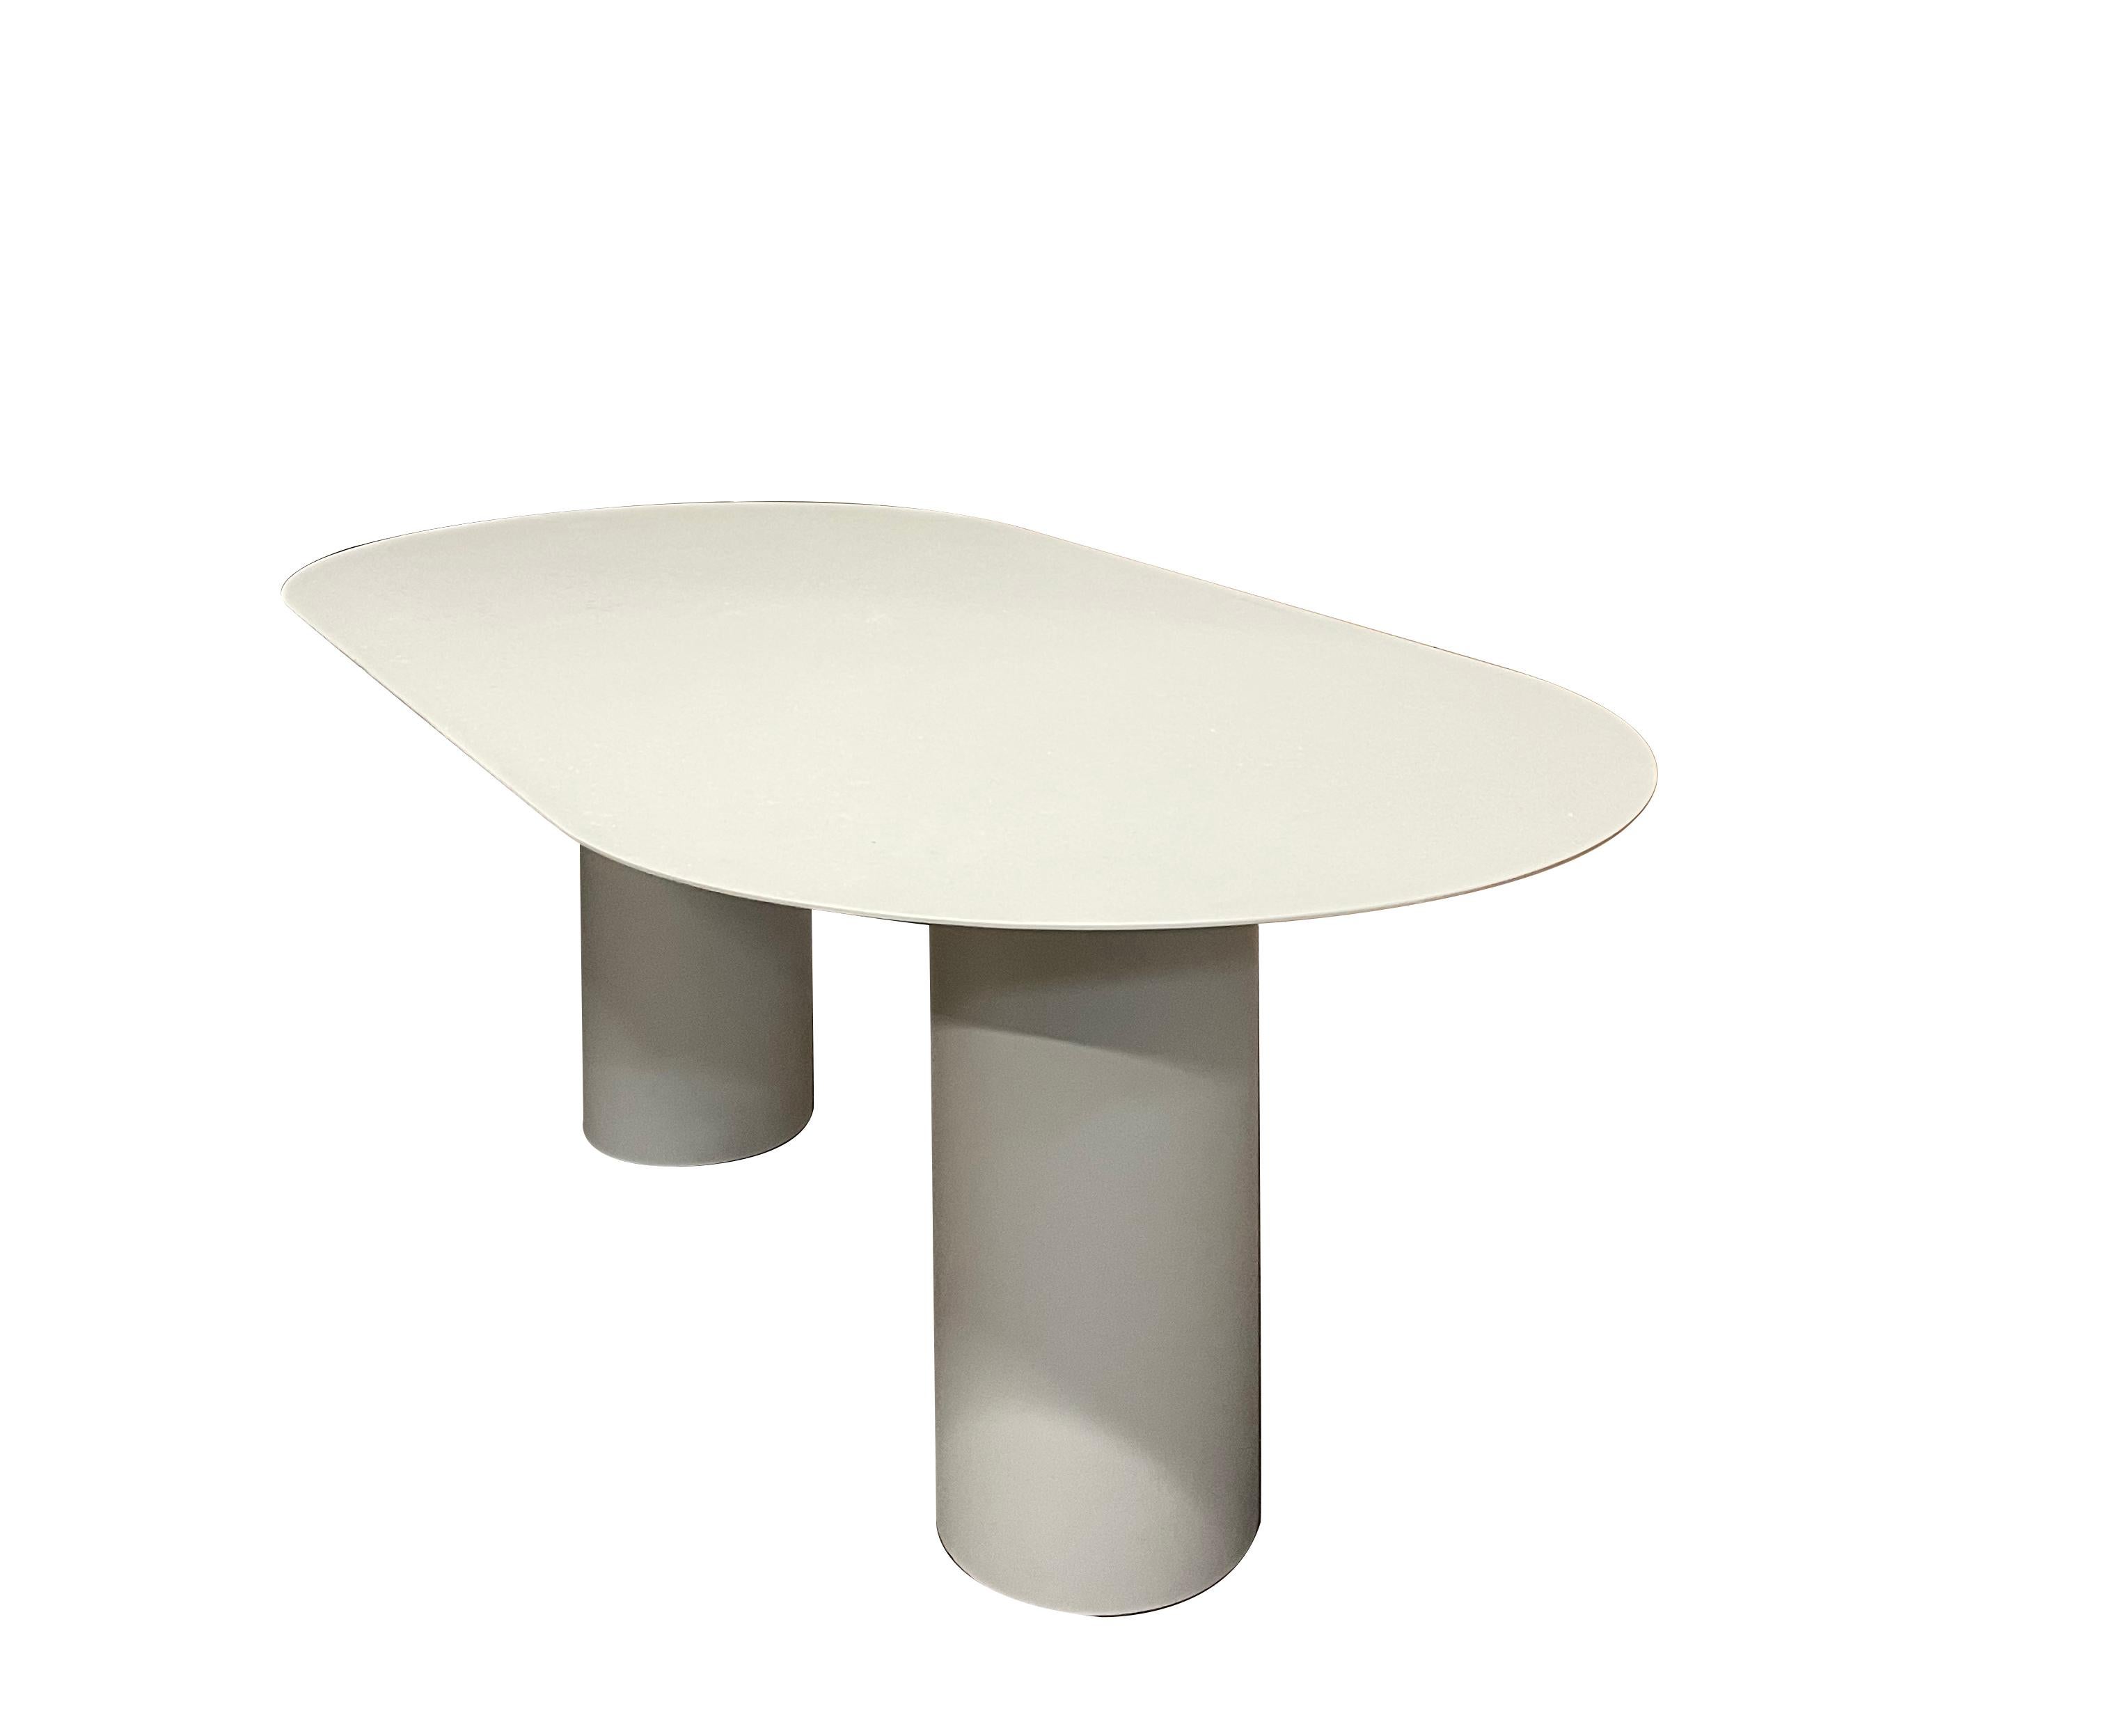 Aluminium table signed by Chanel Kapitanj
Materials: Aluminium, stainless steel feet, RAL
Dimensions: L 300 x W 100 x H 75 cm

   

Born in Liège in 1992, Chanel Kapitanj studied Industrial Design in Belgium. Her fascination to metallic